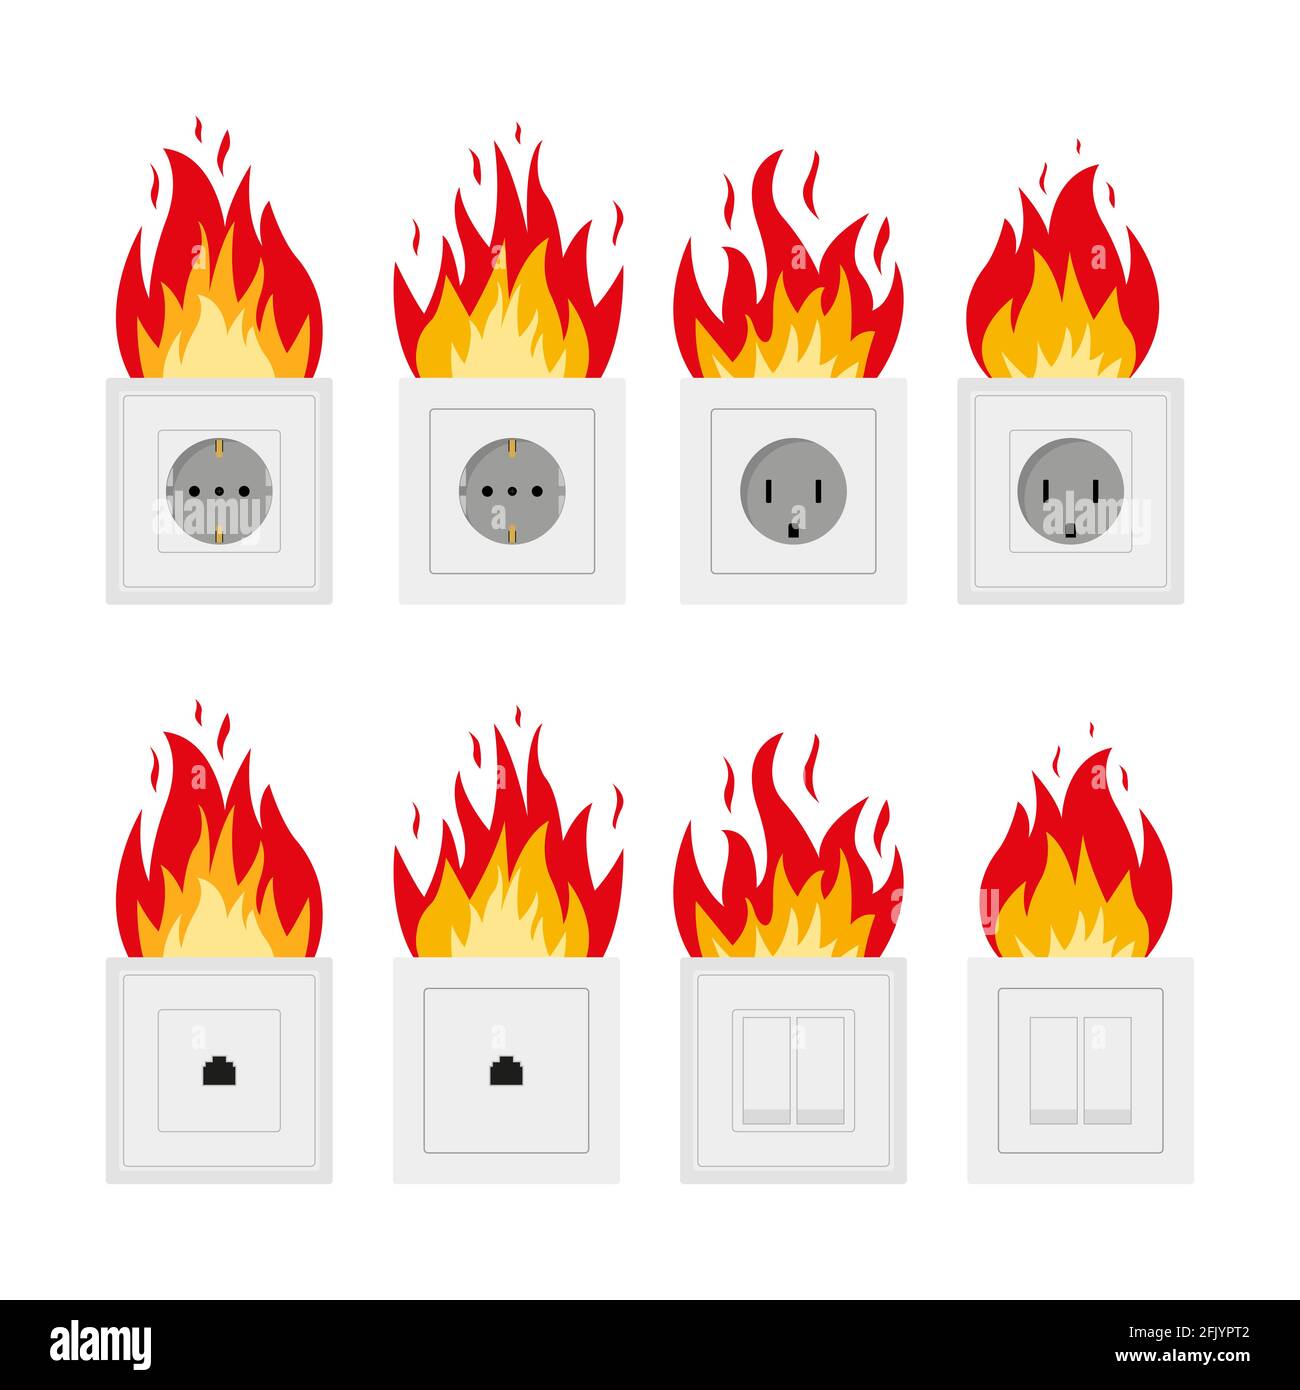 House electrical fire hazard Cut Out Stock Images & Pictures - Alamy